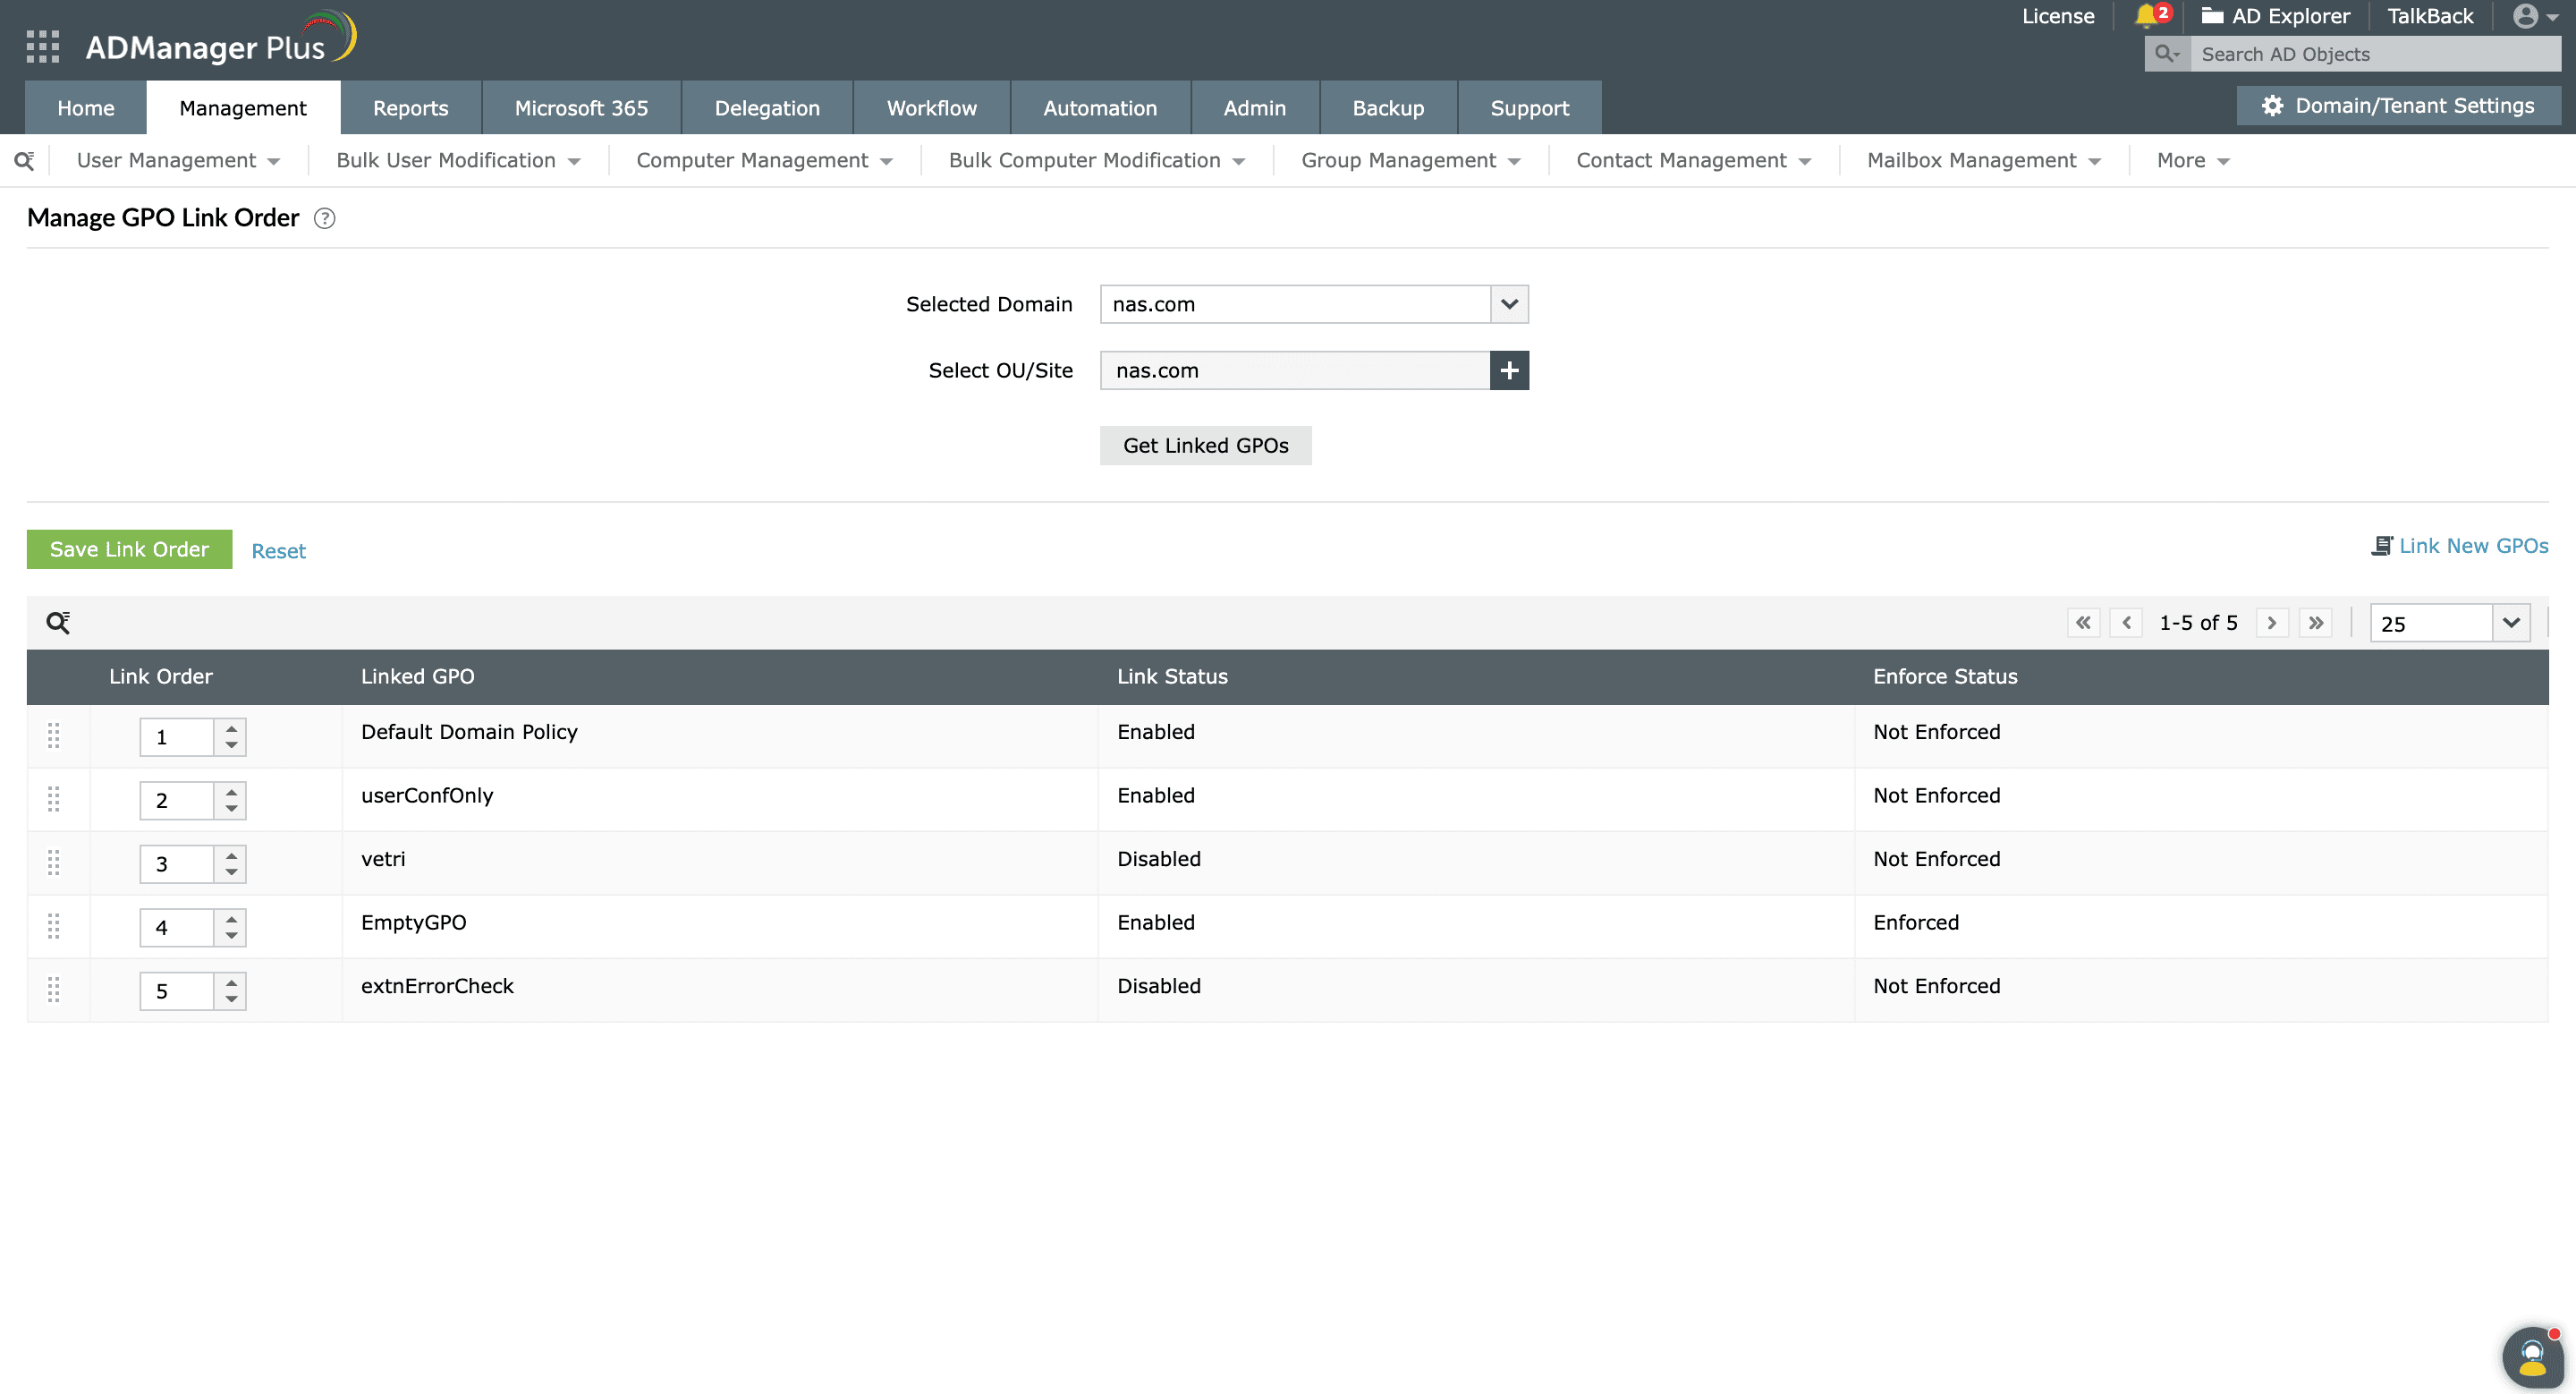 An example of how the GPO link order can be easily managed in ADManager Plus